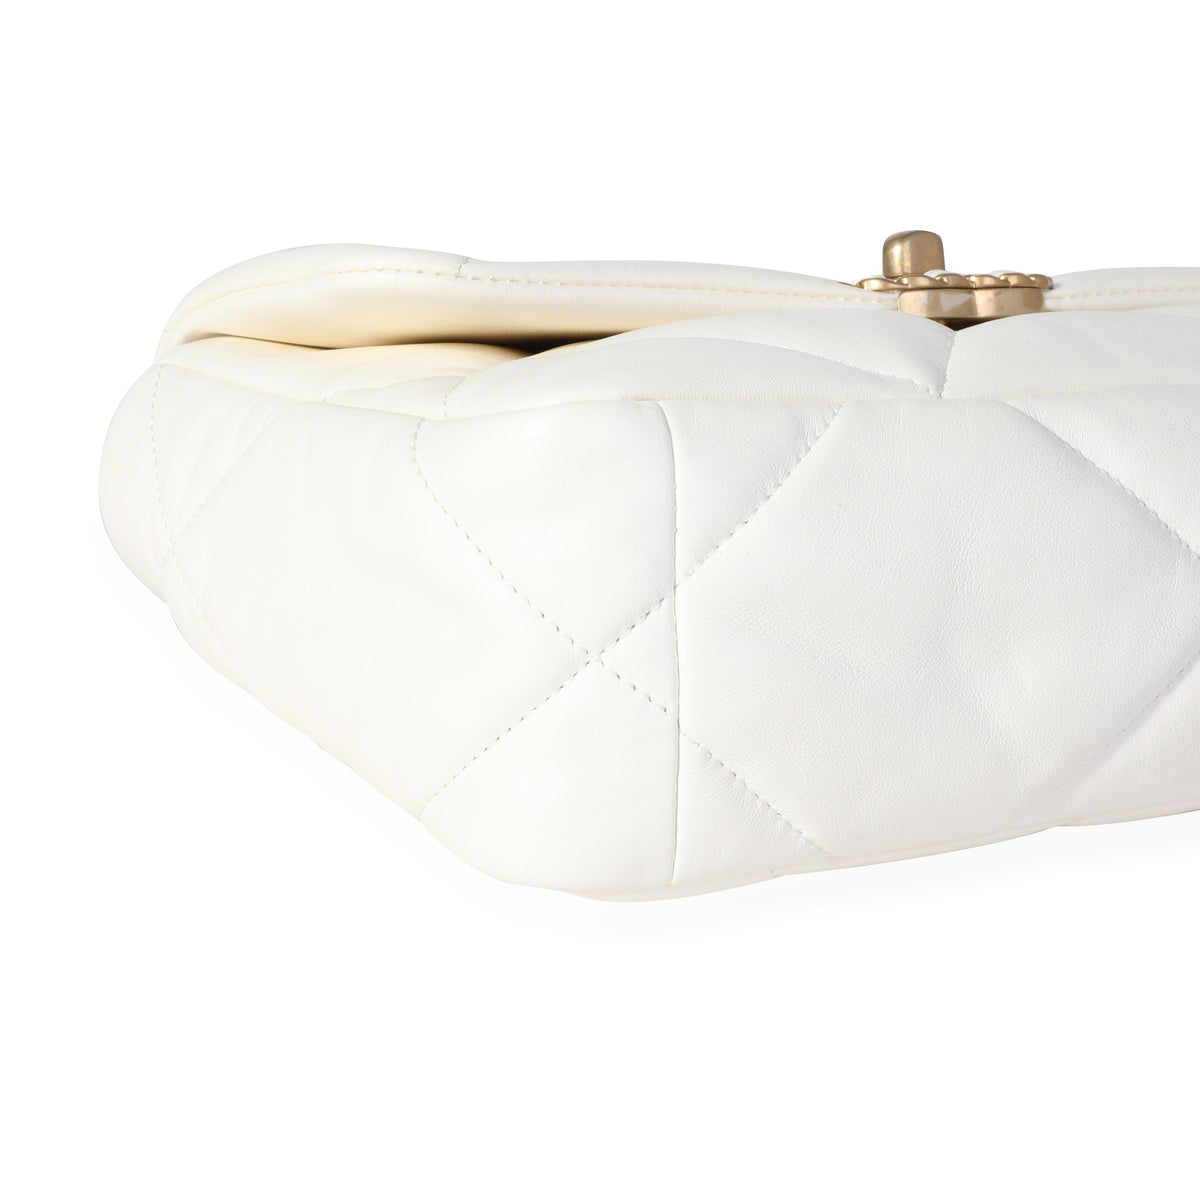 chanel white quilted purse handbag